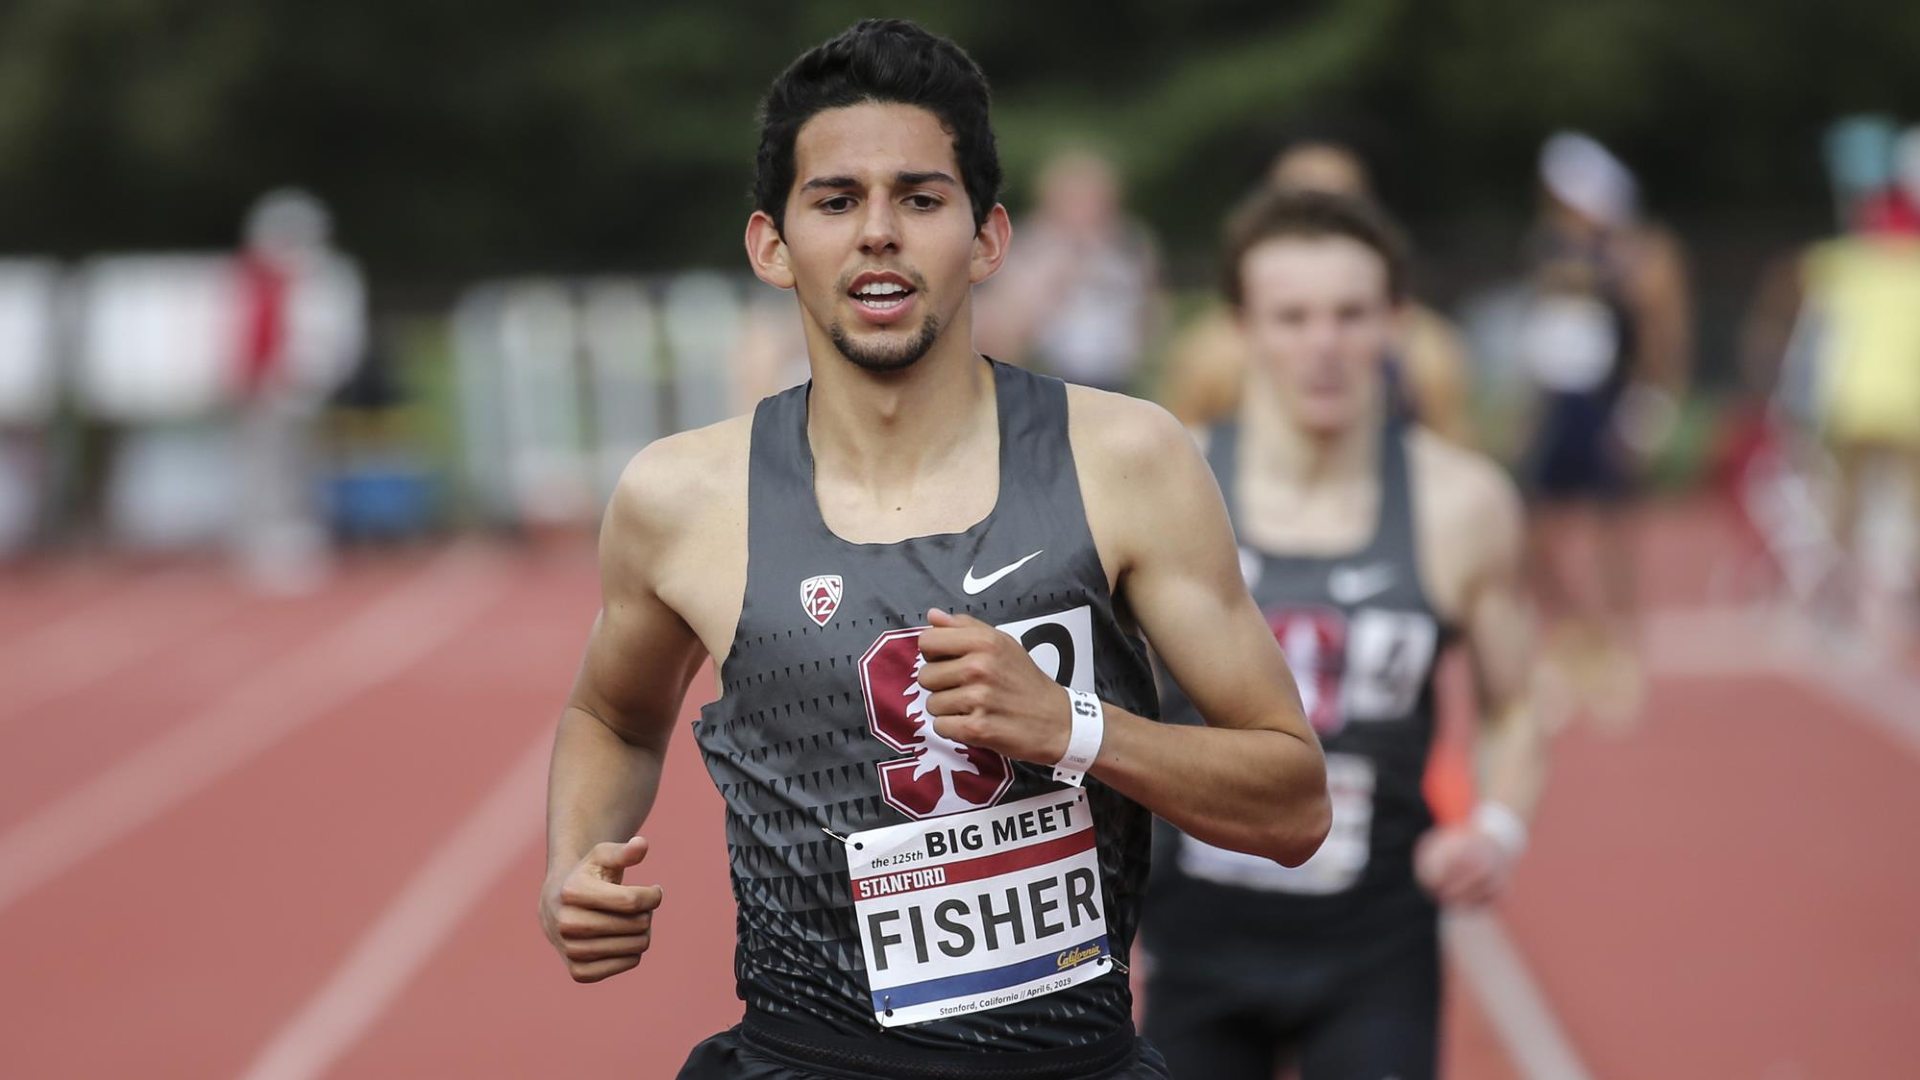 Grant Fisher in action at the Big Meet (Image Credits - Stanford Athletics)